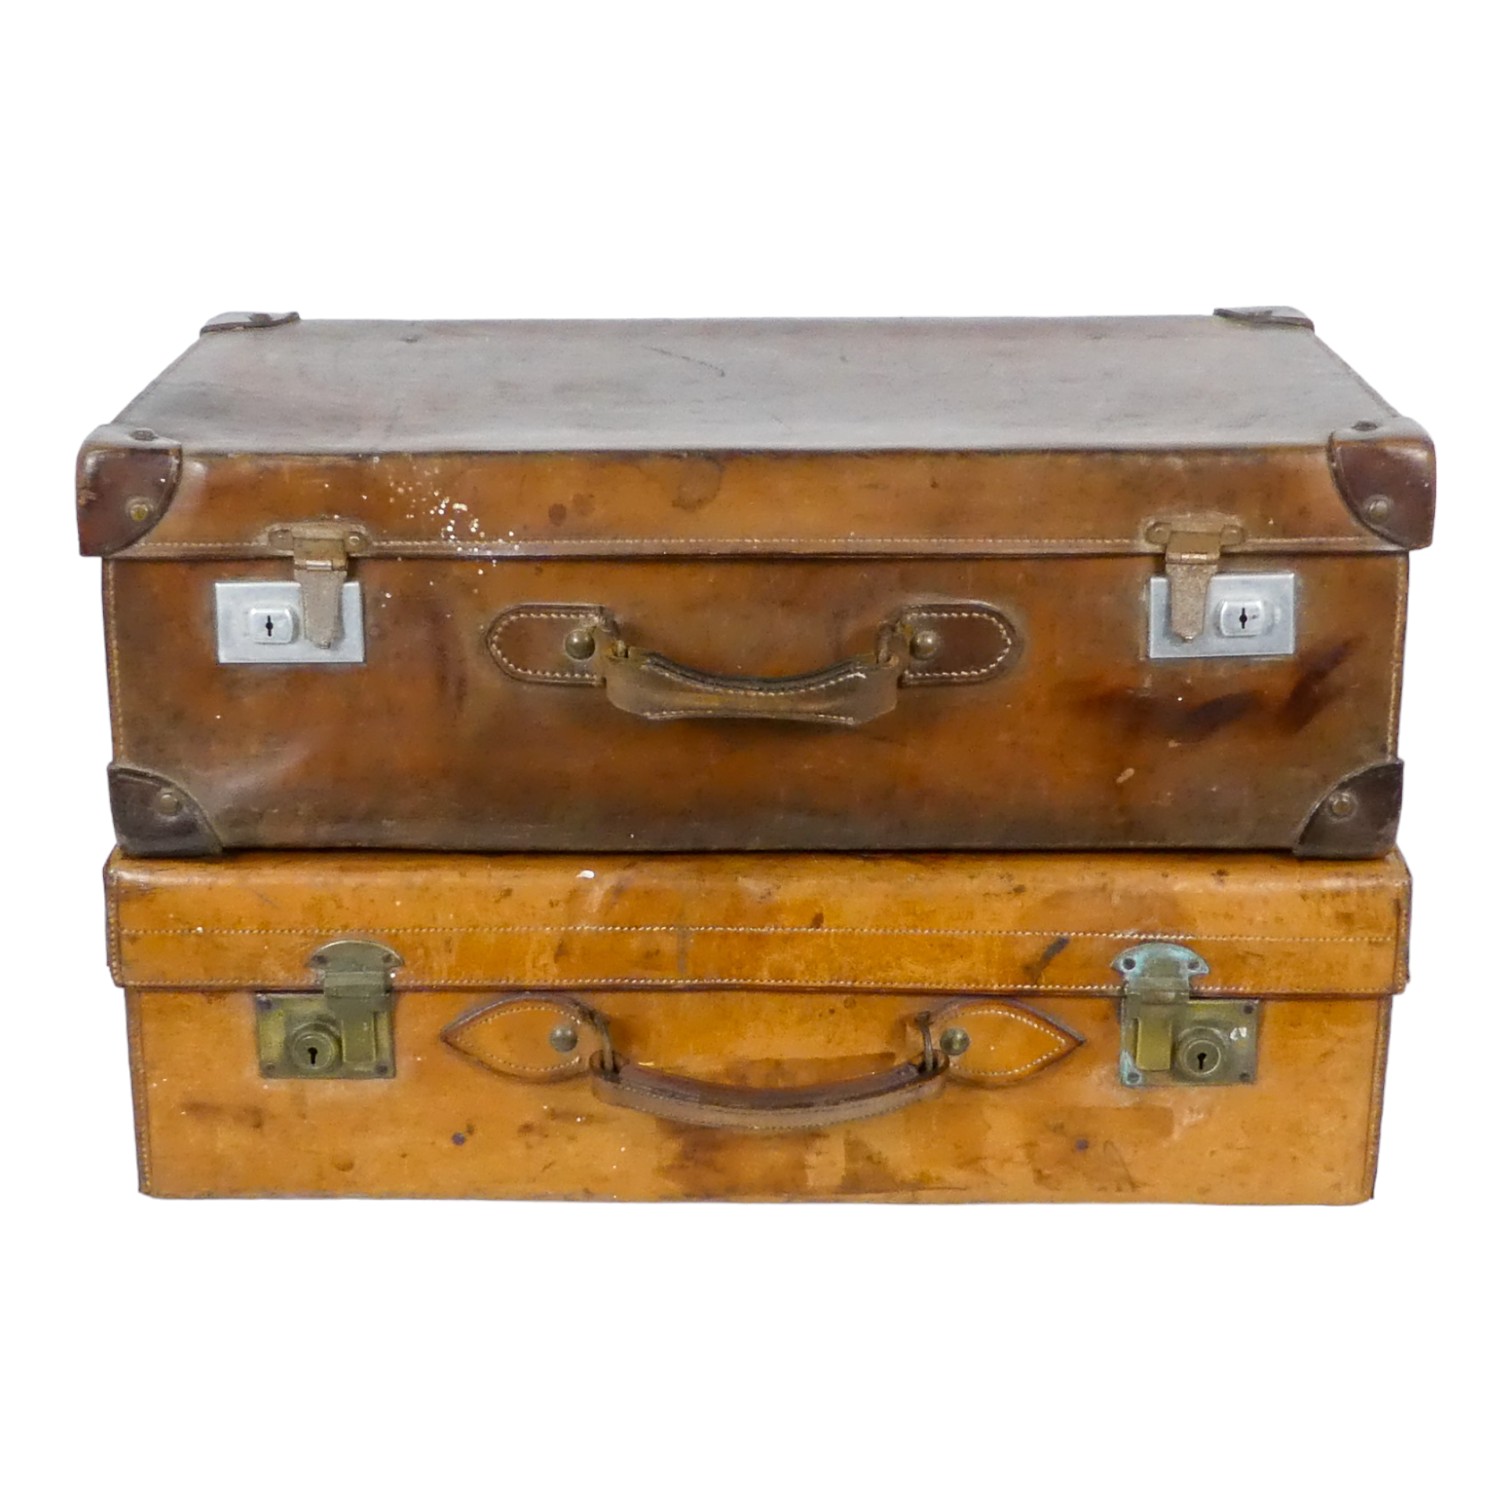 An early 20th century tan leather suitcase - with interesting luggage labels, together with